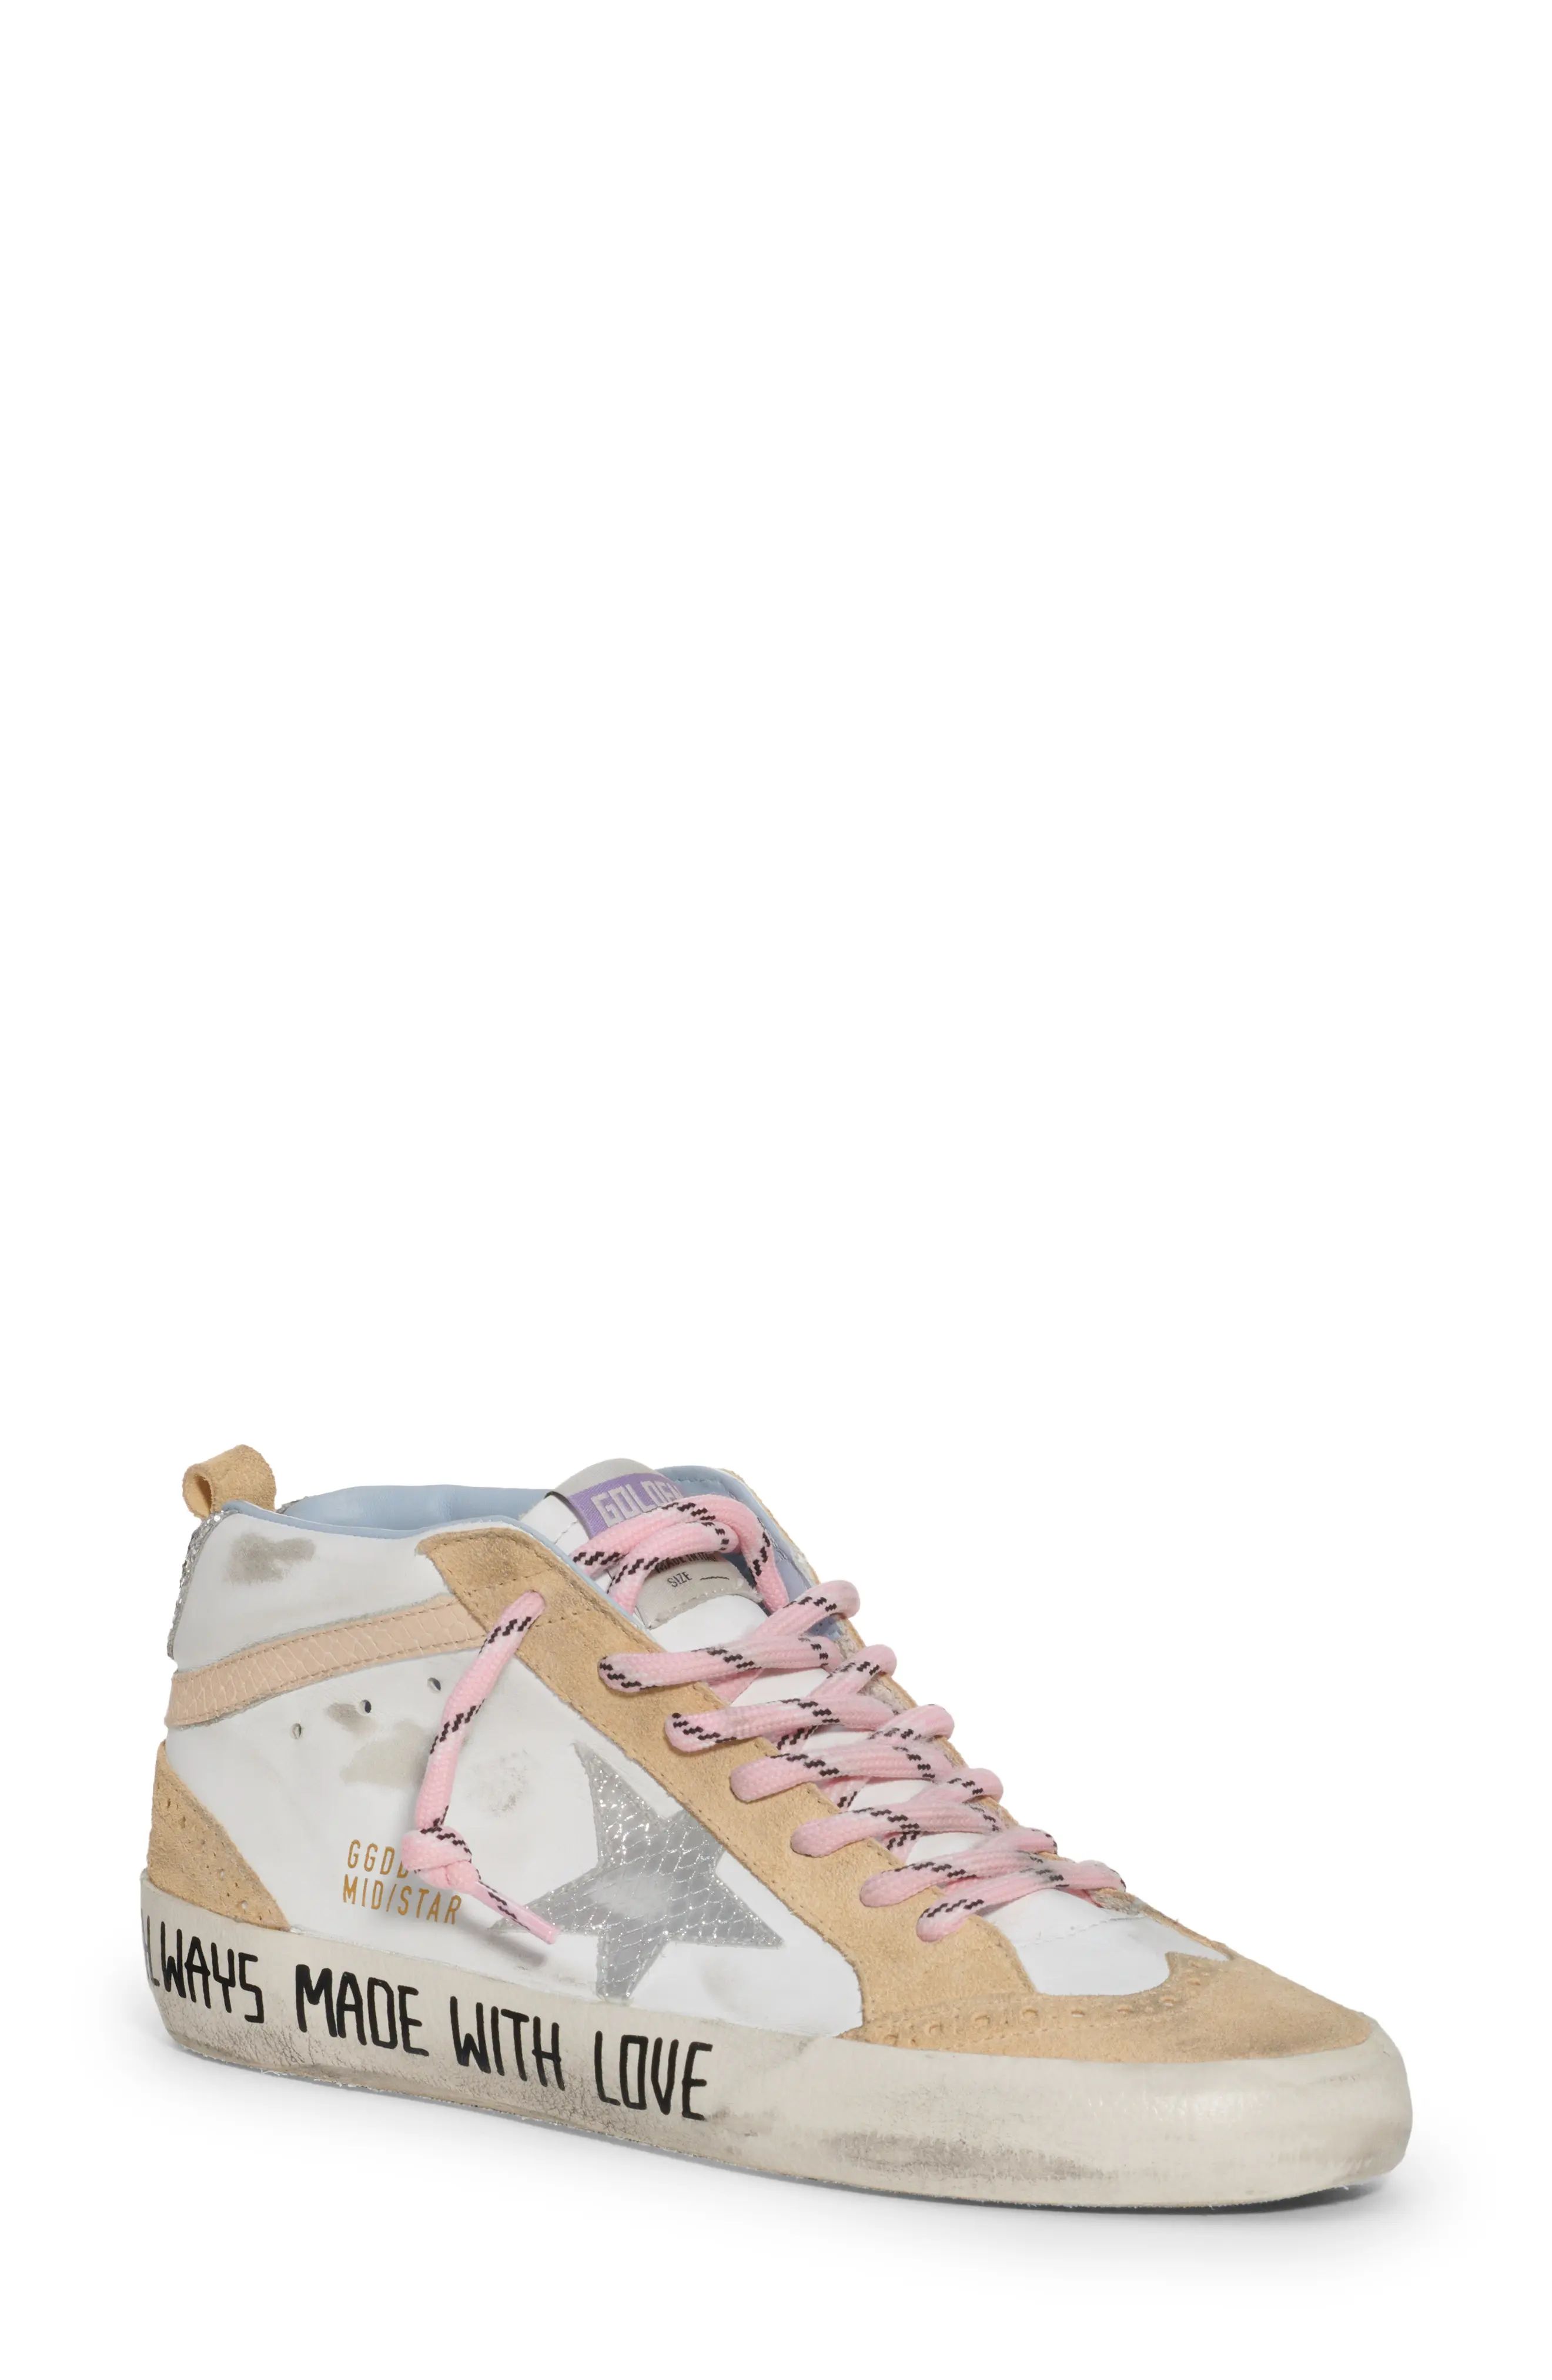 Golden Goose Midstar Made with Love Sneaker in White/Sand/Silver/Cream at Nordstrom, Size 11Us | Nordstrom